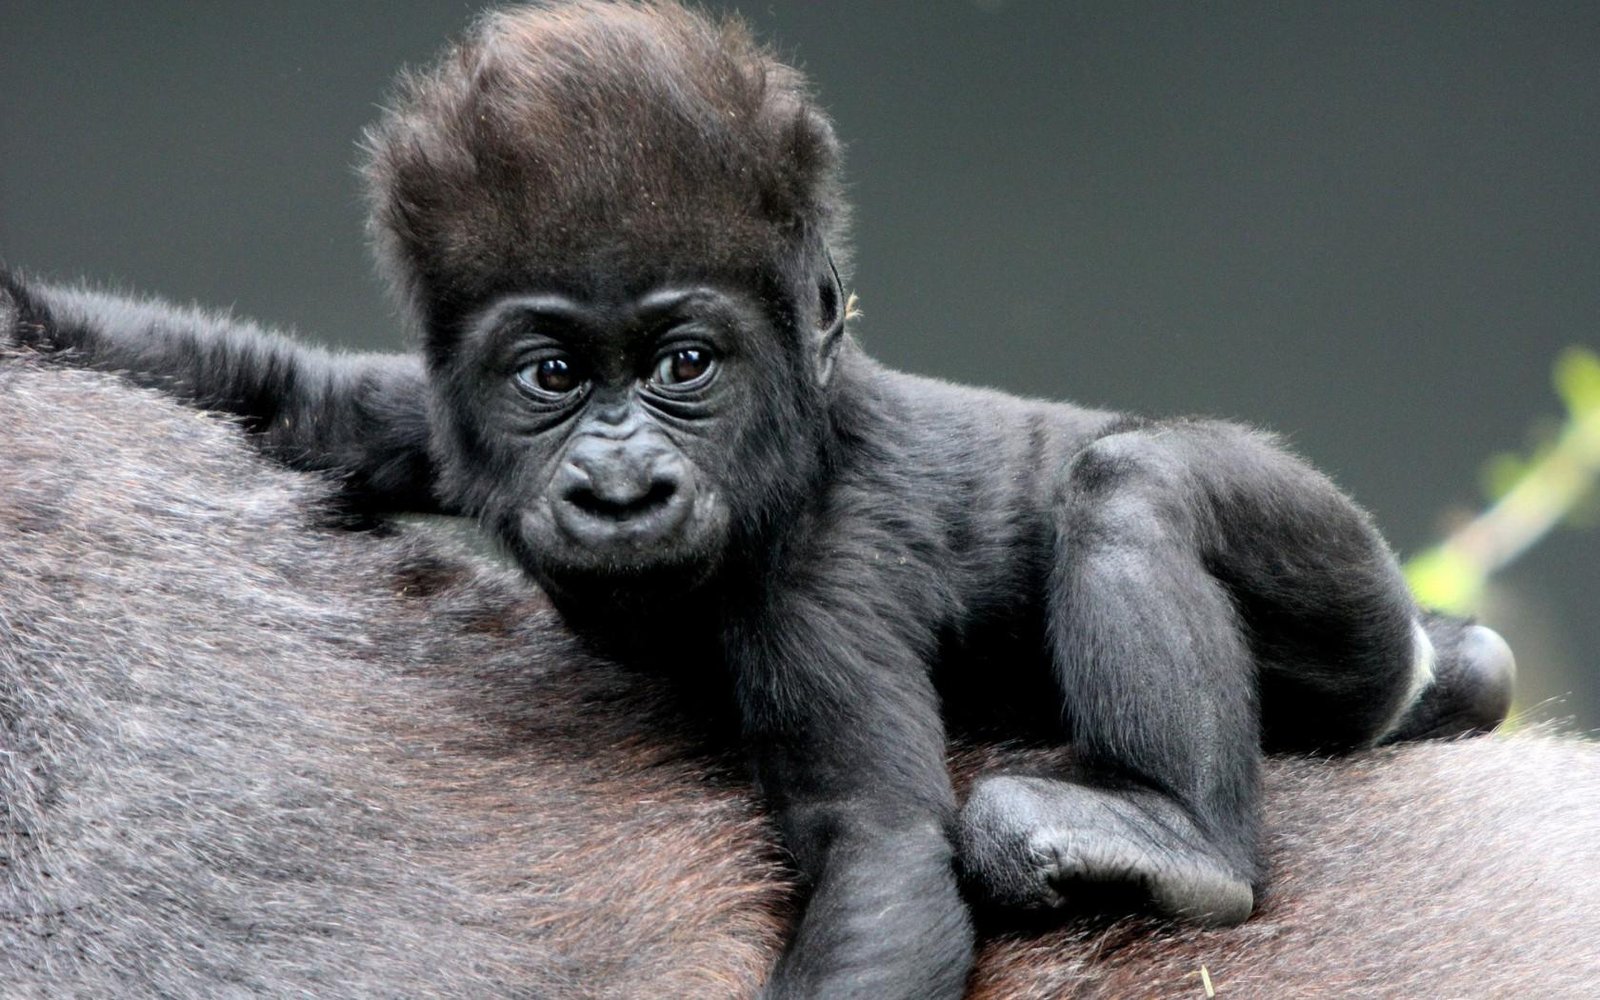 Caring for the Young gorillas